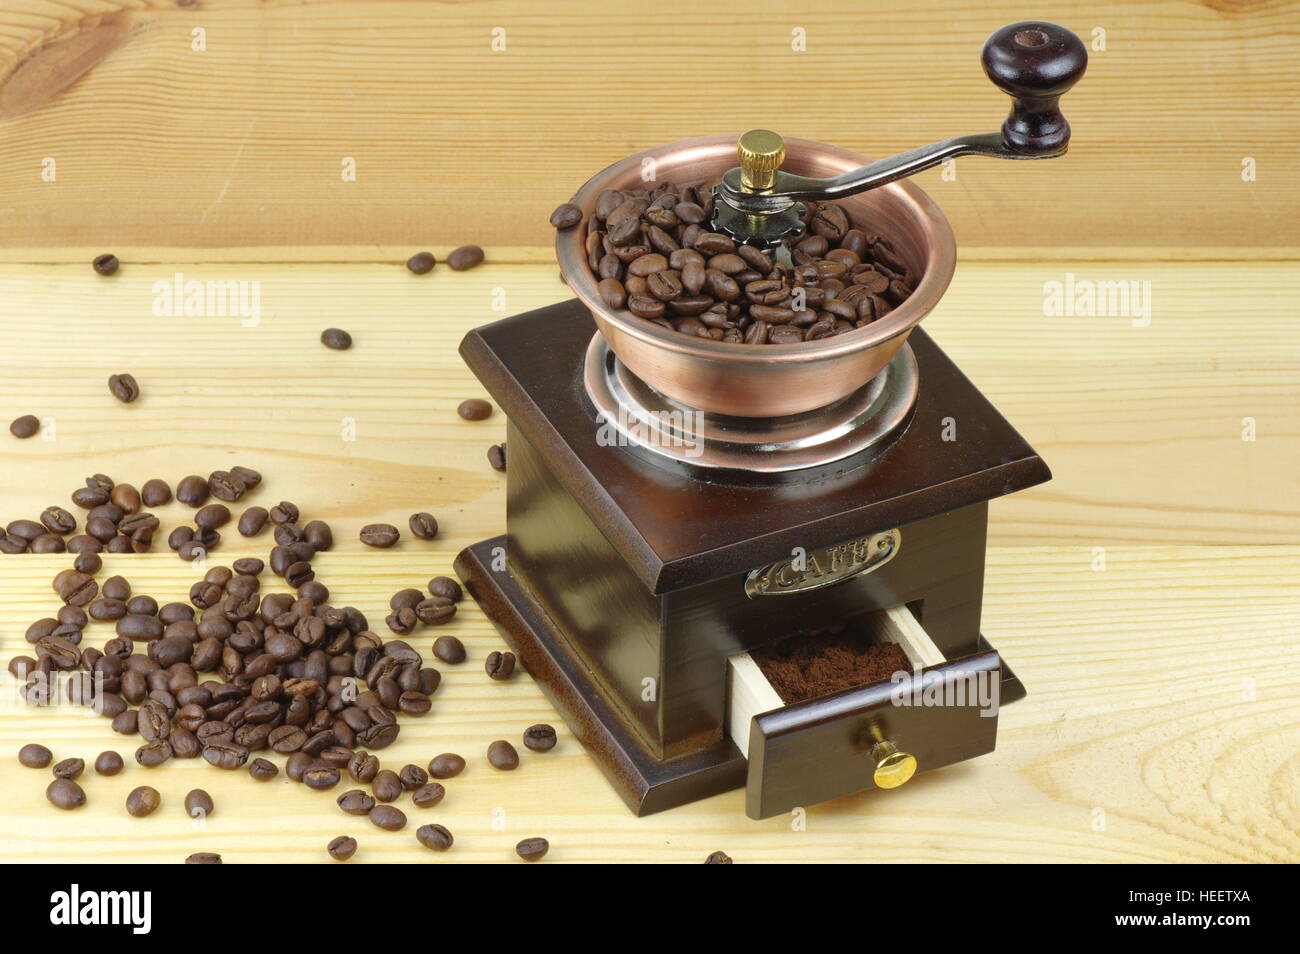 Old-style manual coffee grinder on a rustic table with wooden planks. Around the mill are scattered coffee beans. Stock Photo